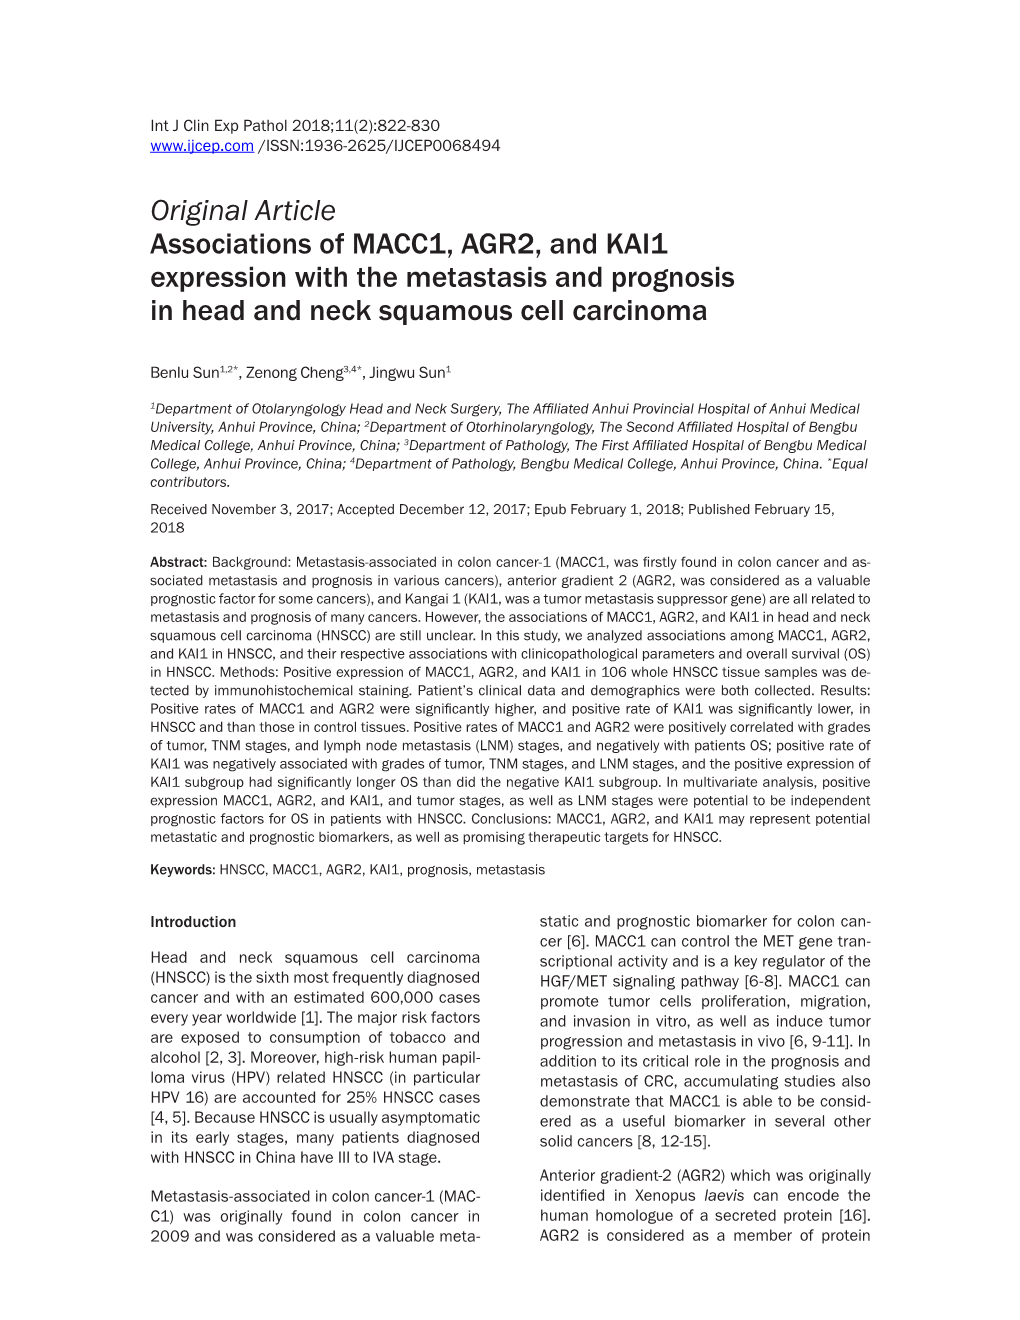 Original Article Associations of MACC1, AGR2, and KAI1 Expression with the Metastasis and Prognosis in Head and Neck Squamous Cell Carcinoma